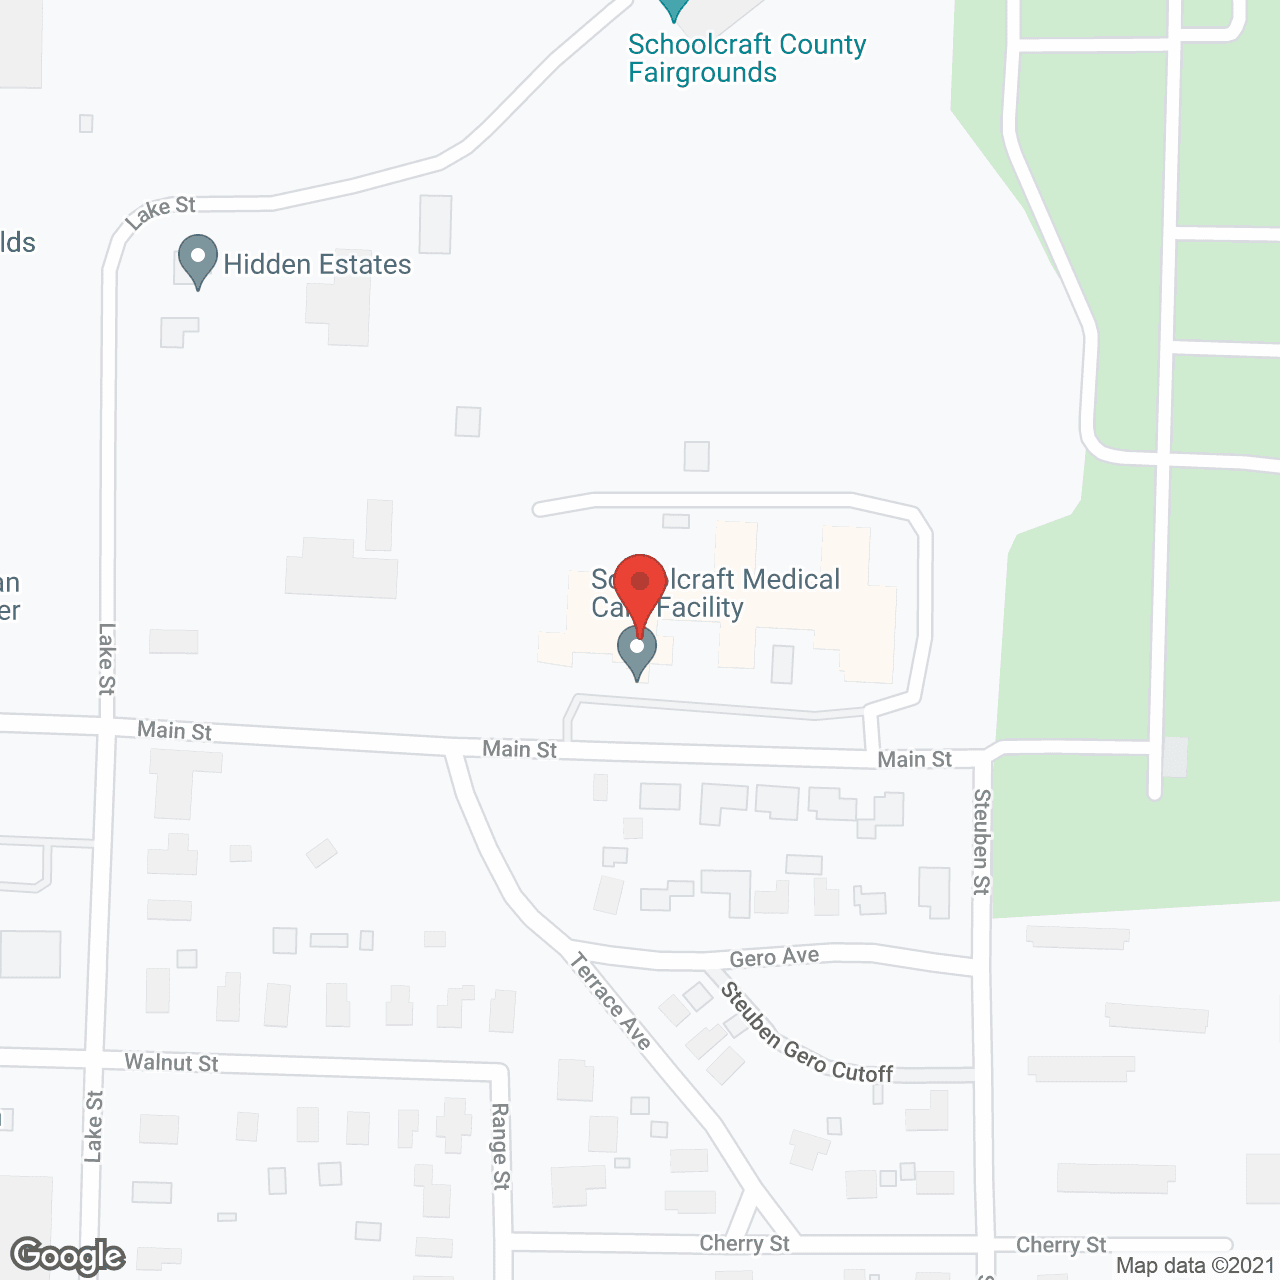 Schoolcraft Medical Care in google map